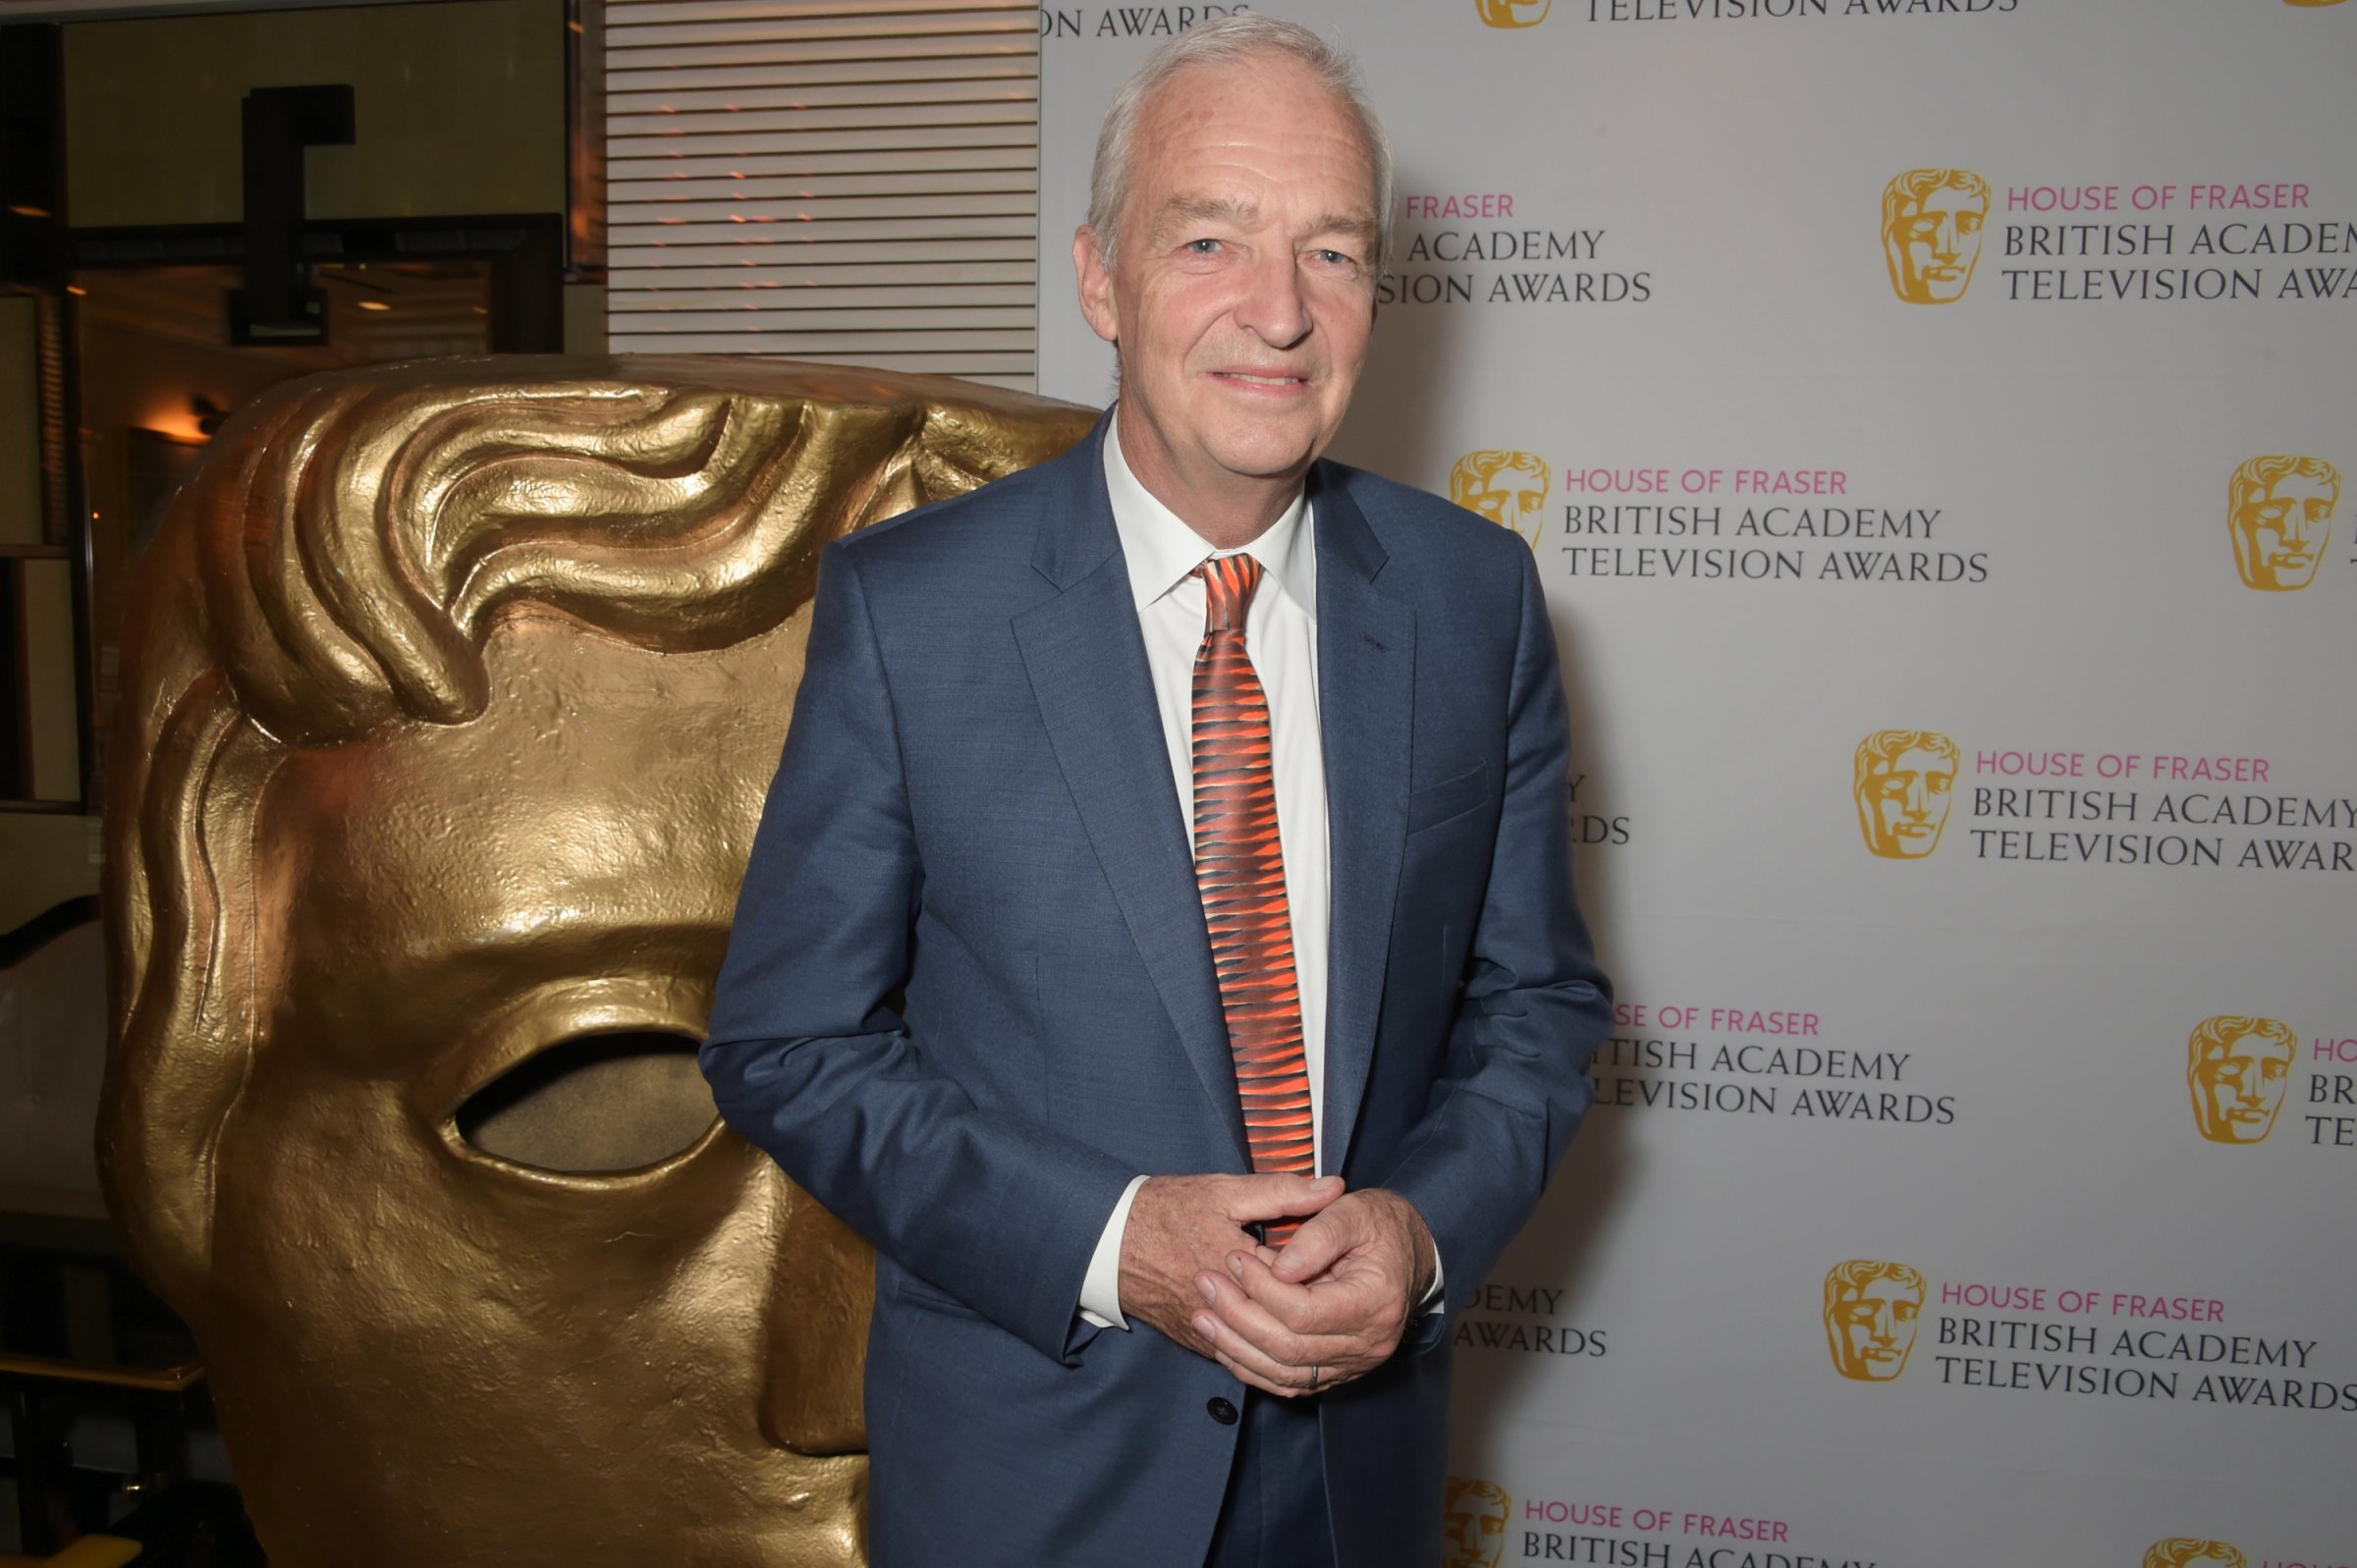 attends a lunch to celebrate Jon Snow being awarded the BAFTA Fellowship at the Corinthia Hotel London on May 7, 2015 in London, England.